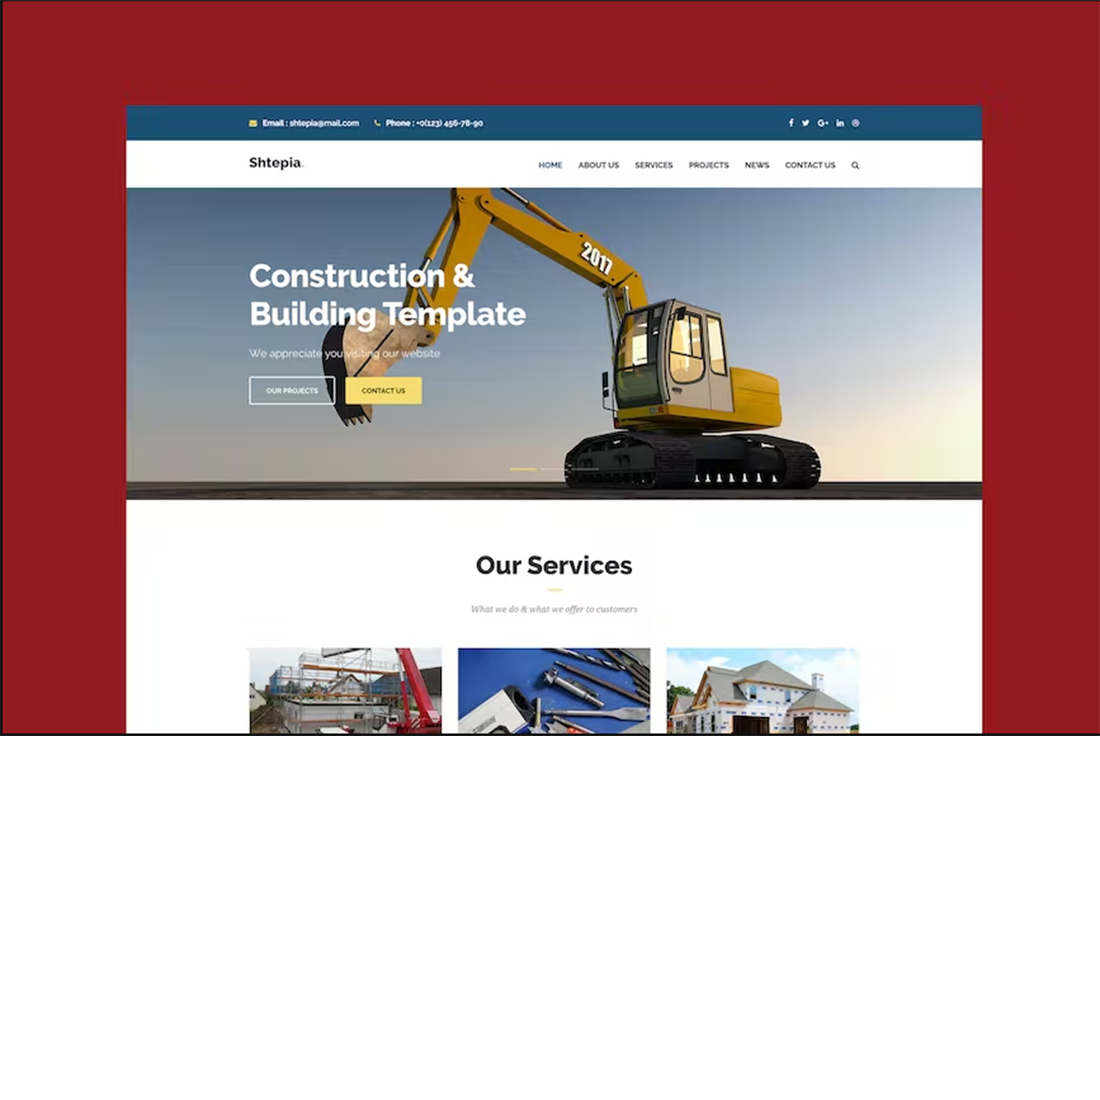 Free Shtepia Construction & Building HTML5 Template cover image.